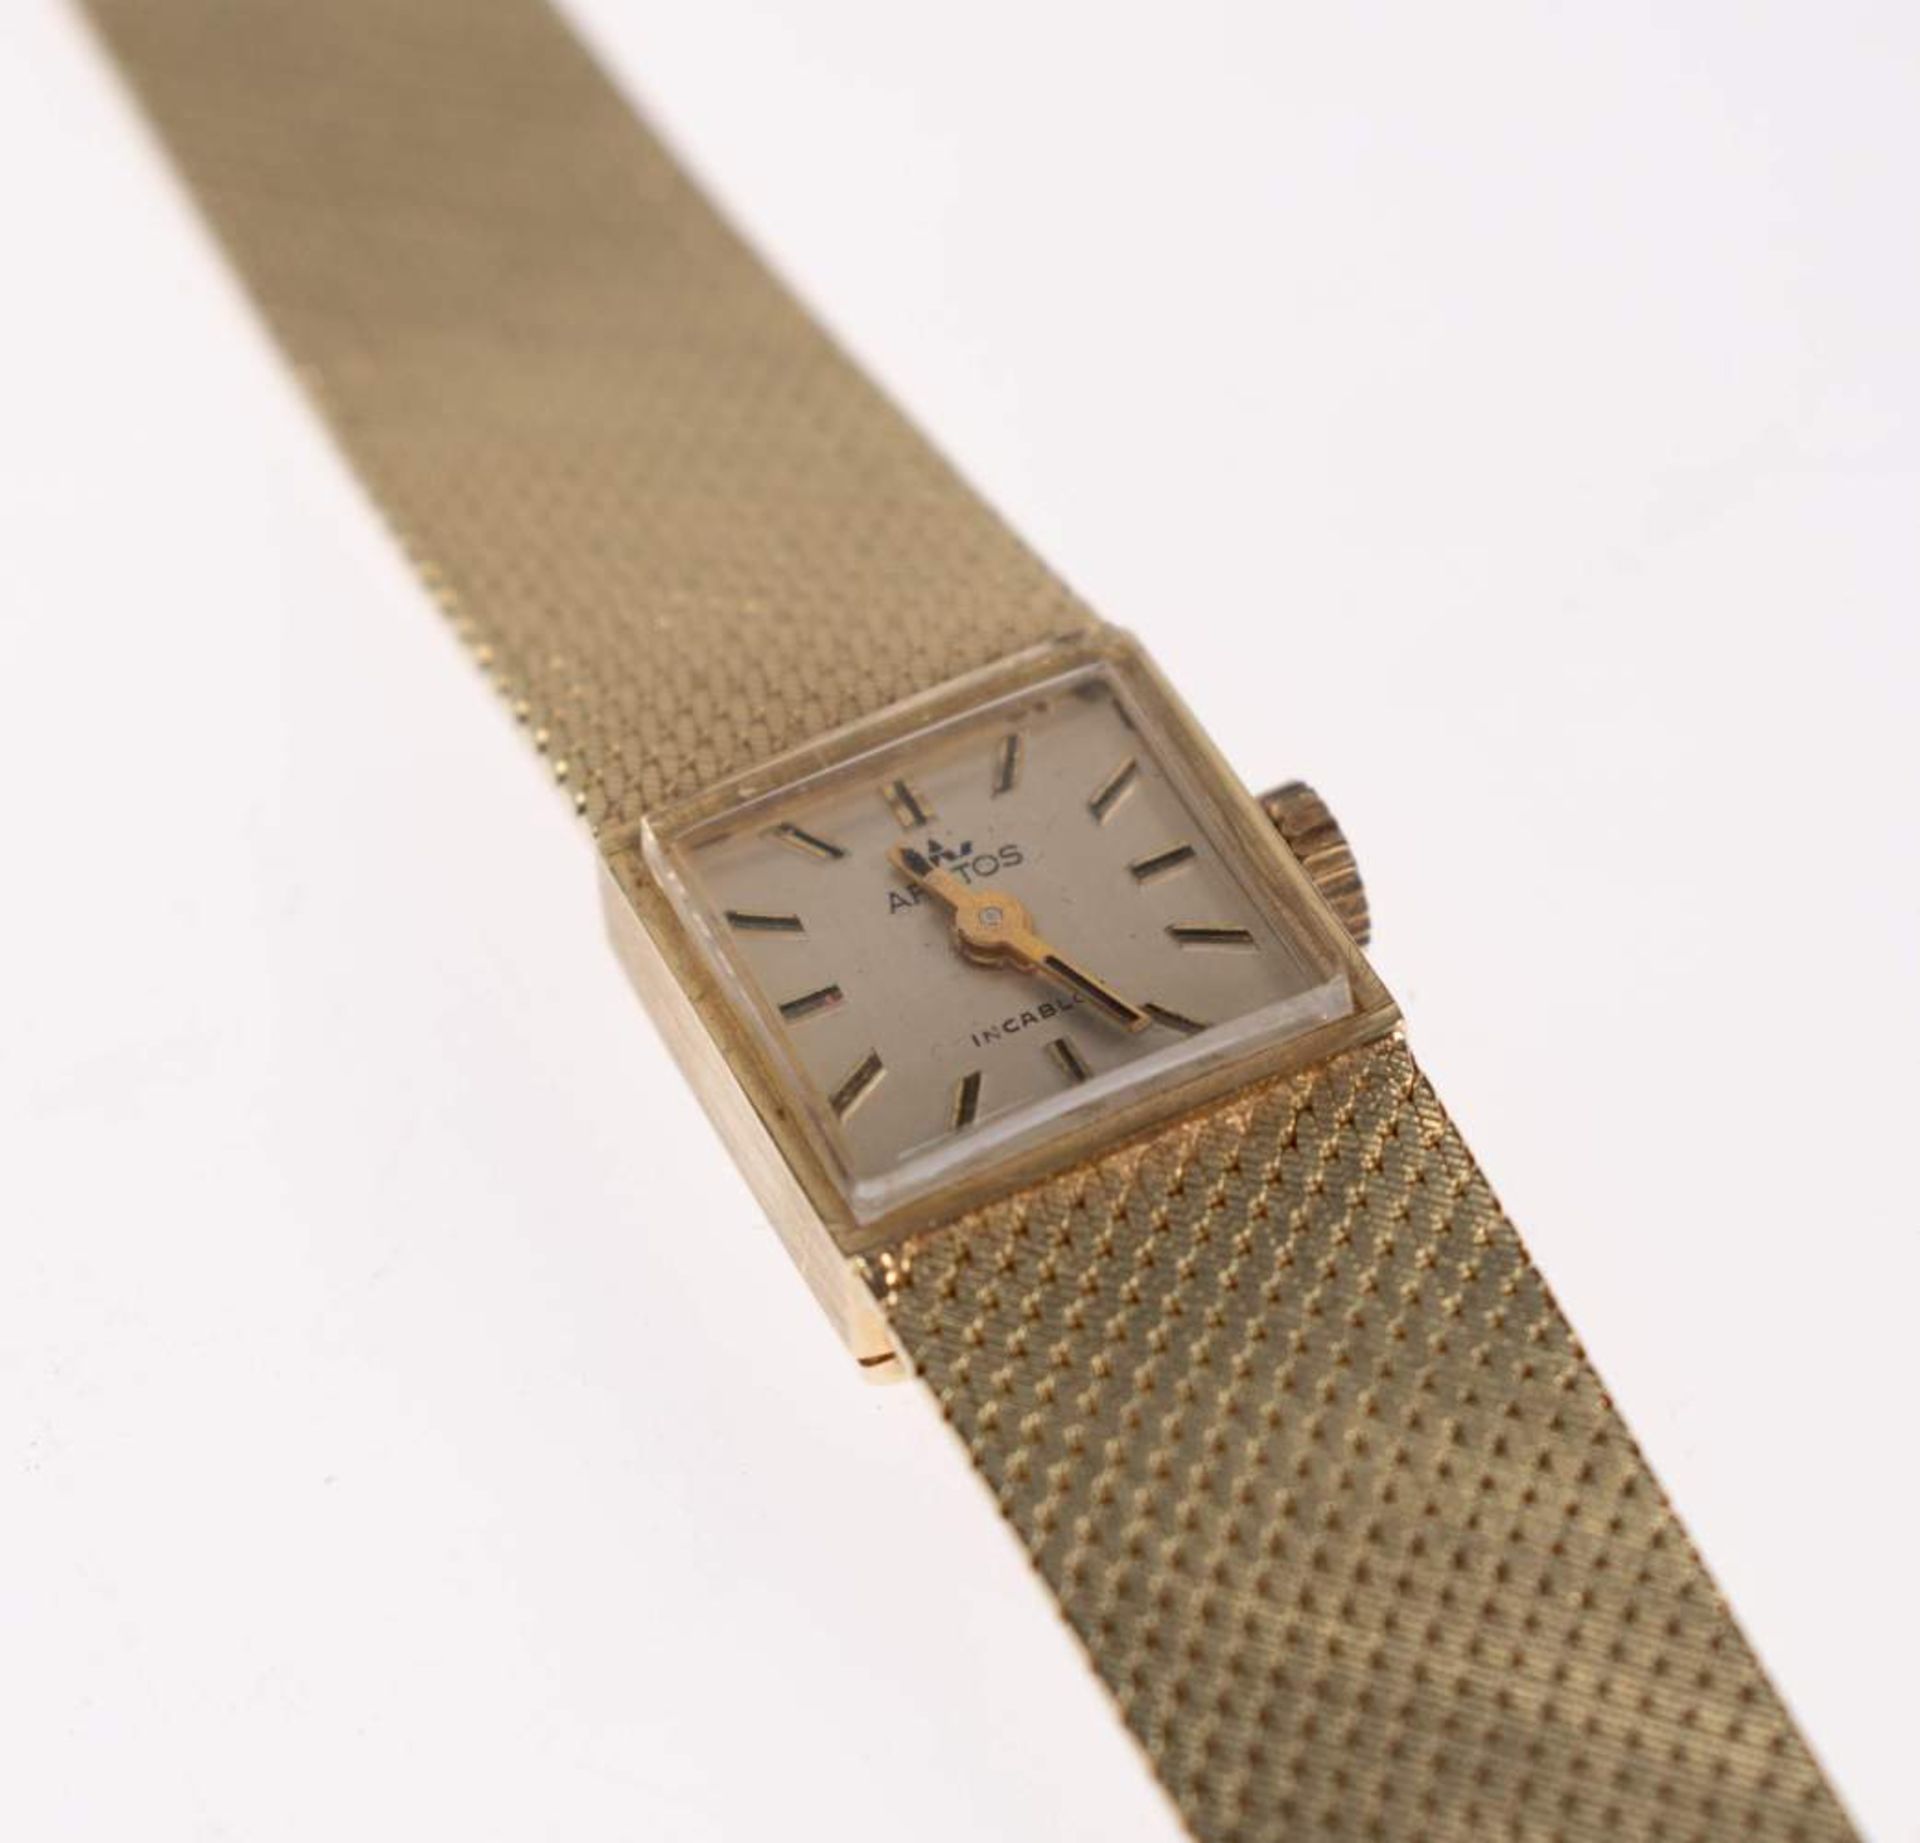 Arctos womens watch. Ca. 14 mm, 585er yellow gold, manual wind. Enameled dial with golden hands and - Image 3 of 4